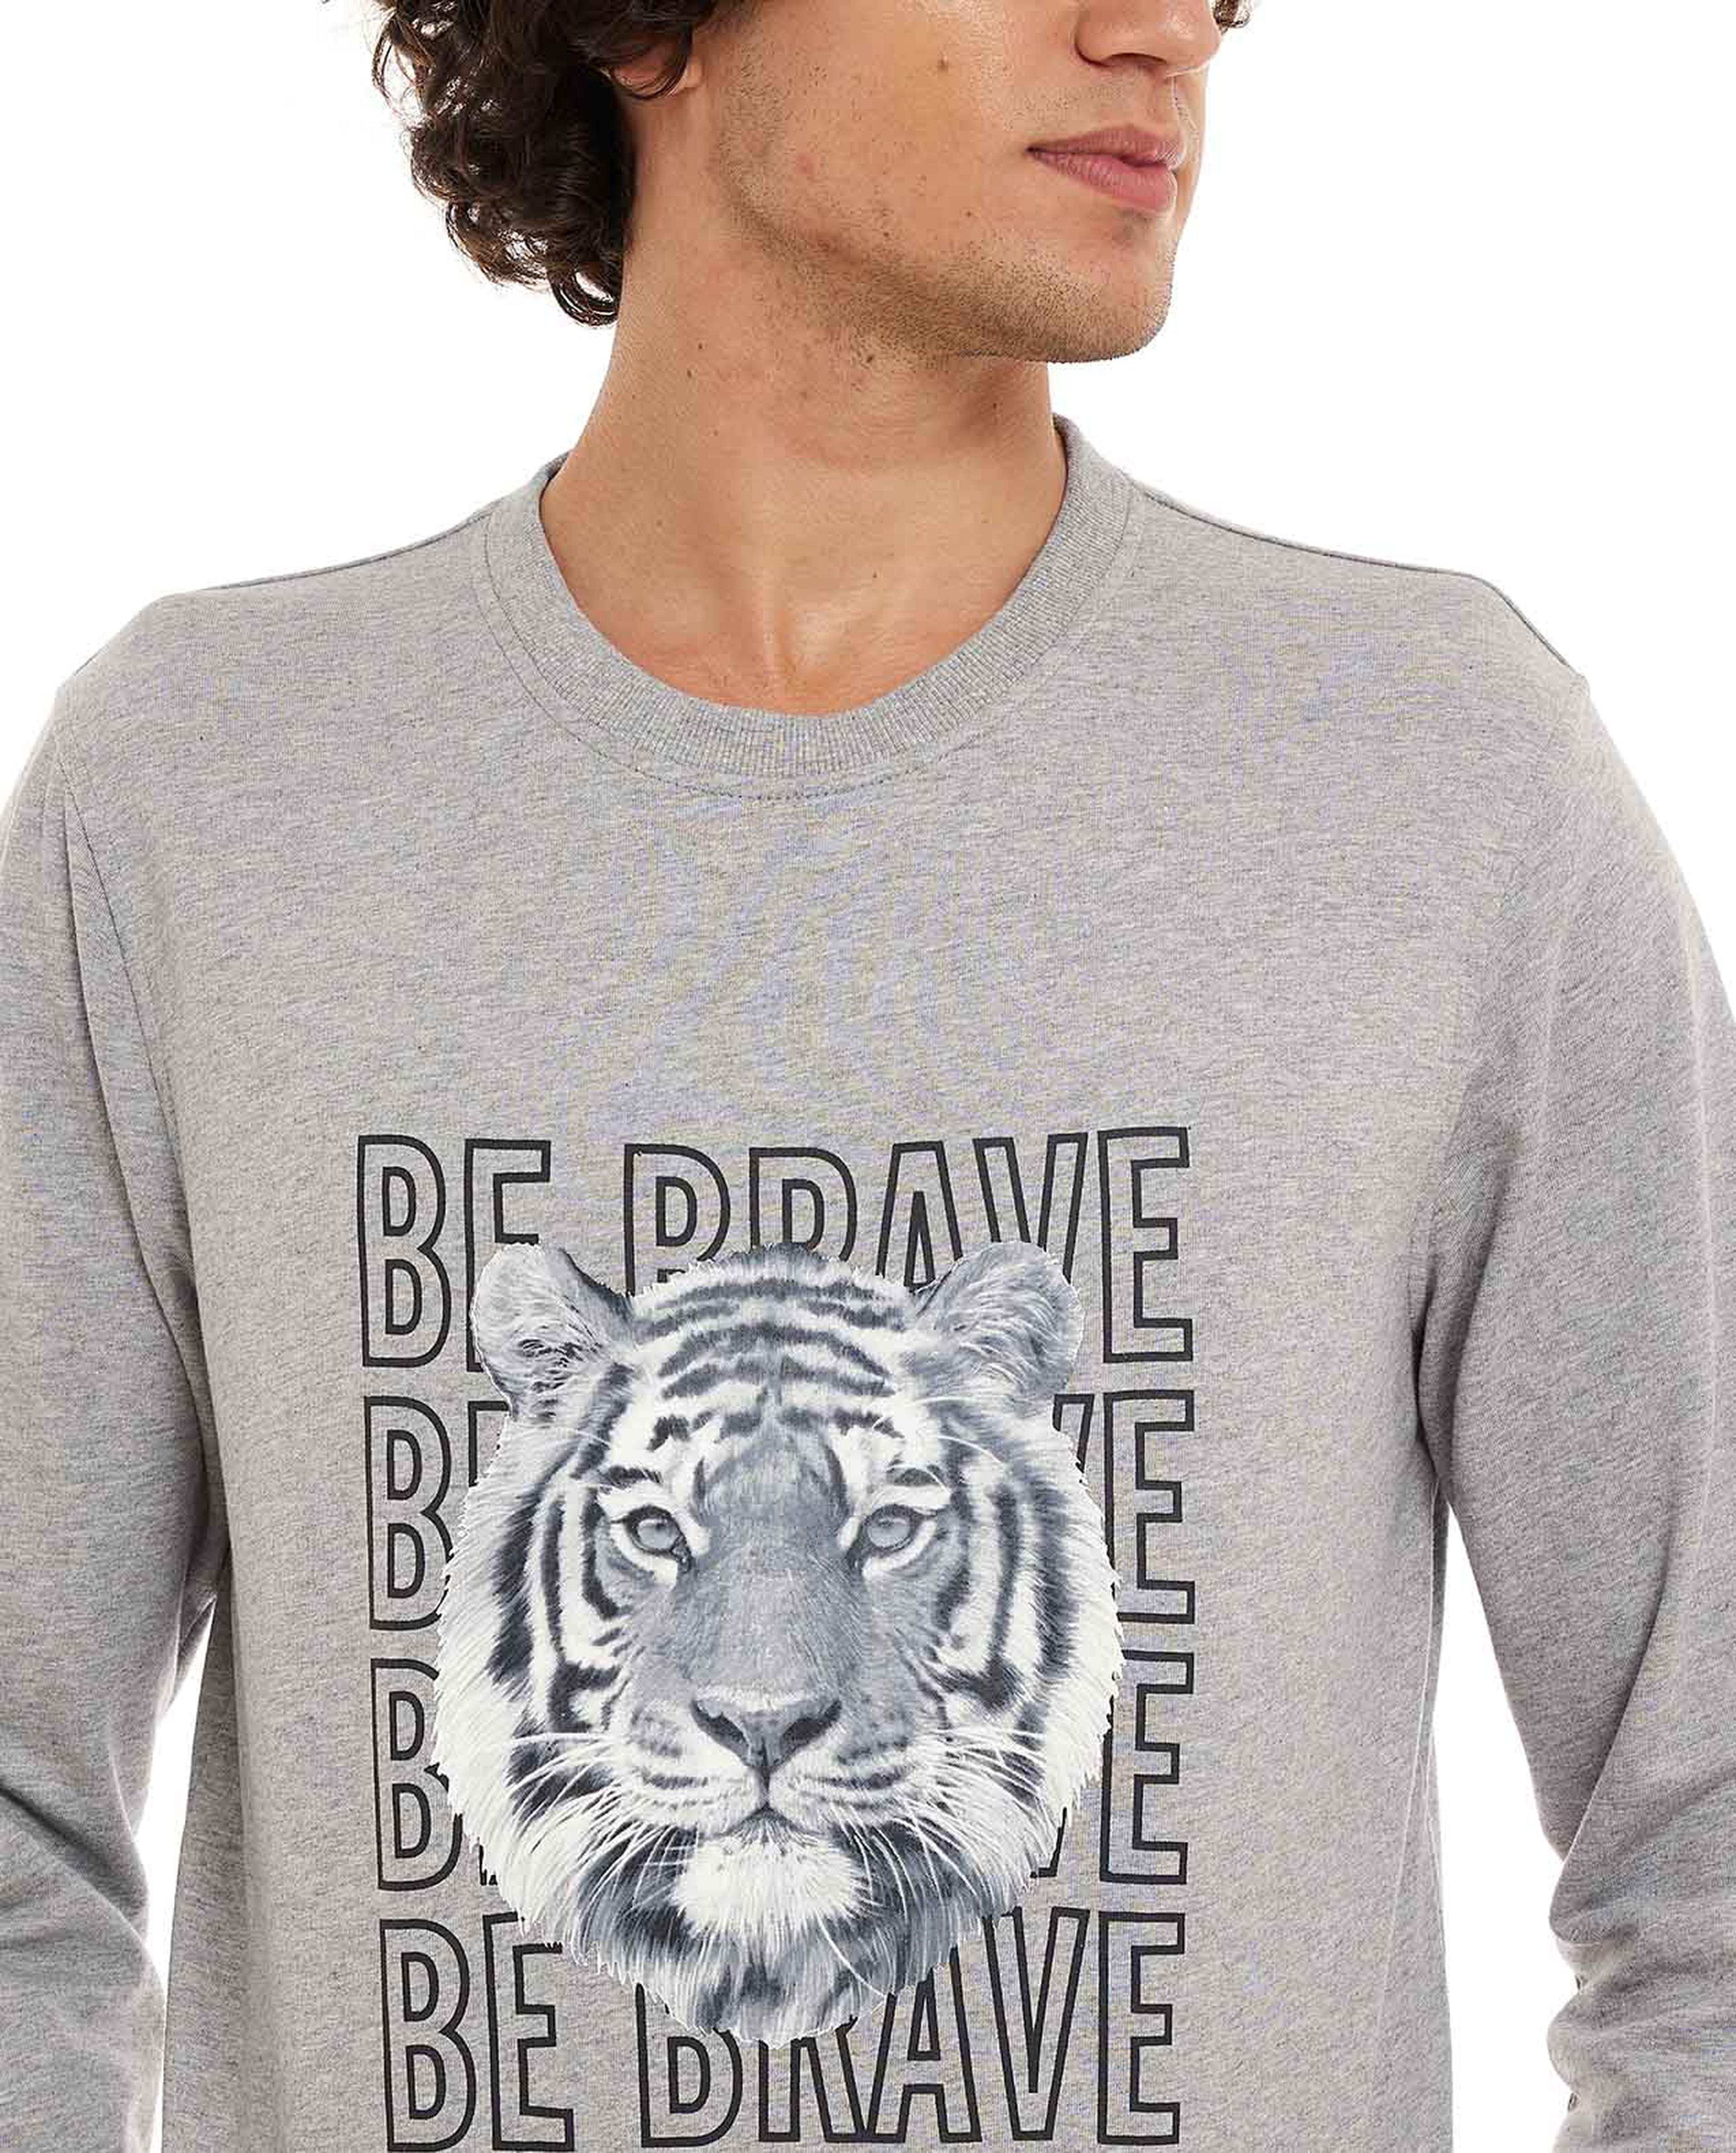 Printed Sweatshirt with Crew Neck and Long Sleeves